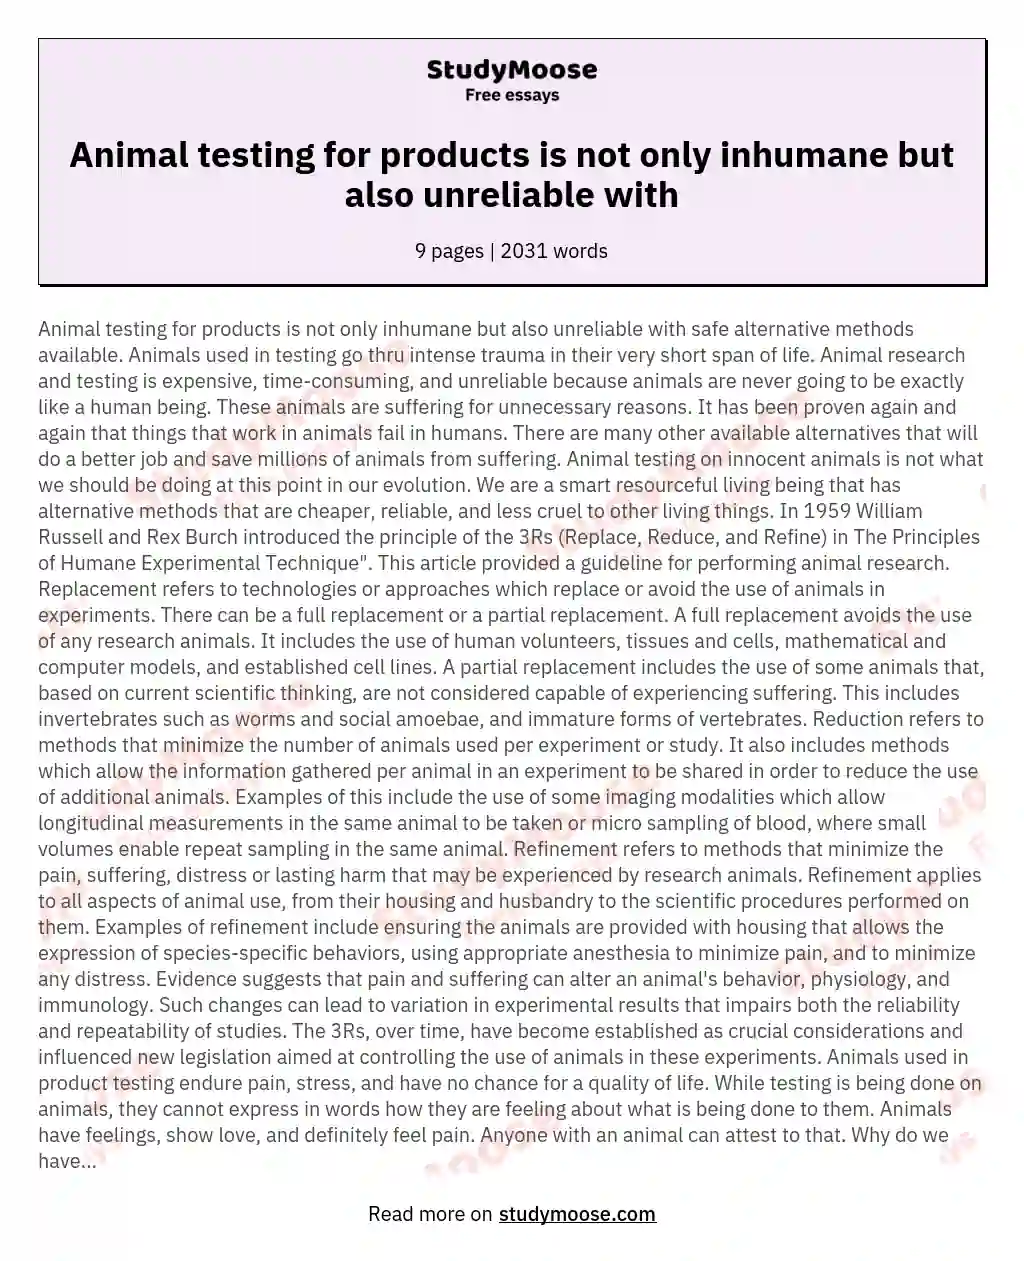 Animal testing for products is not only inhumane but also unreliable with